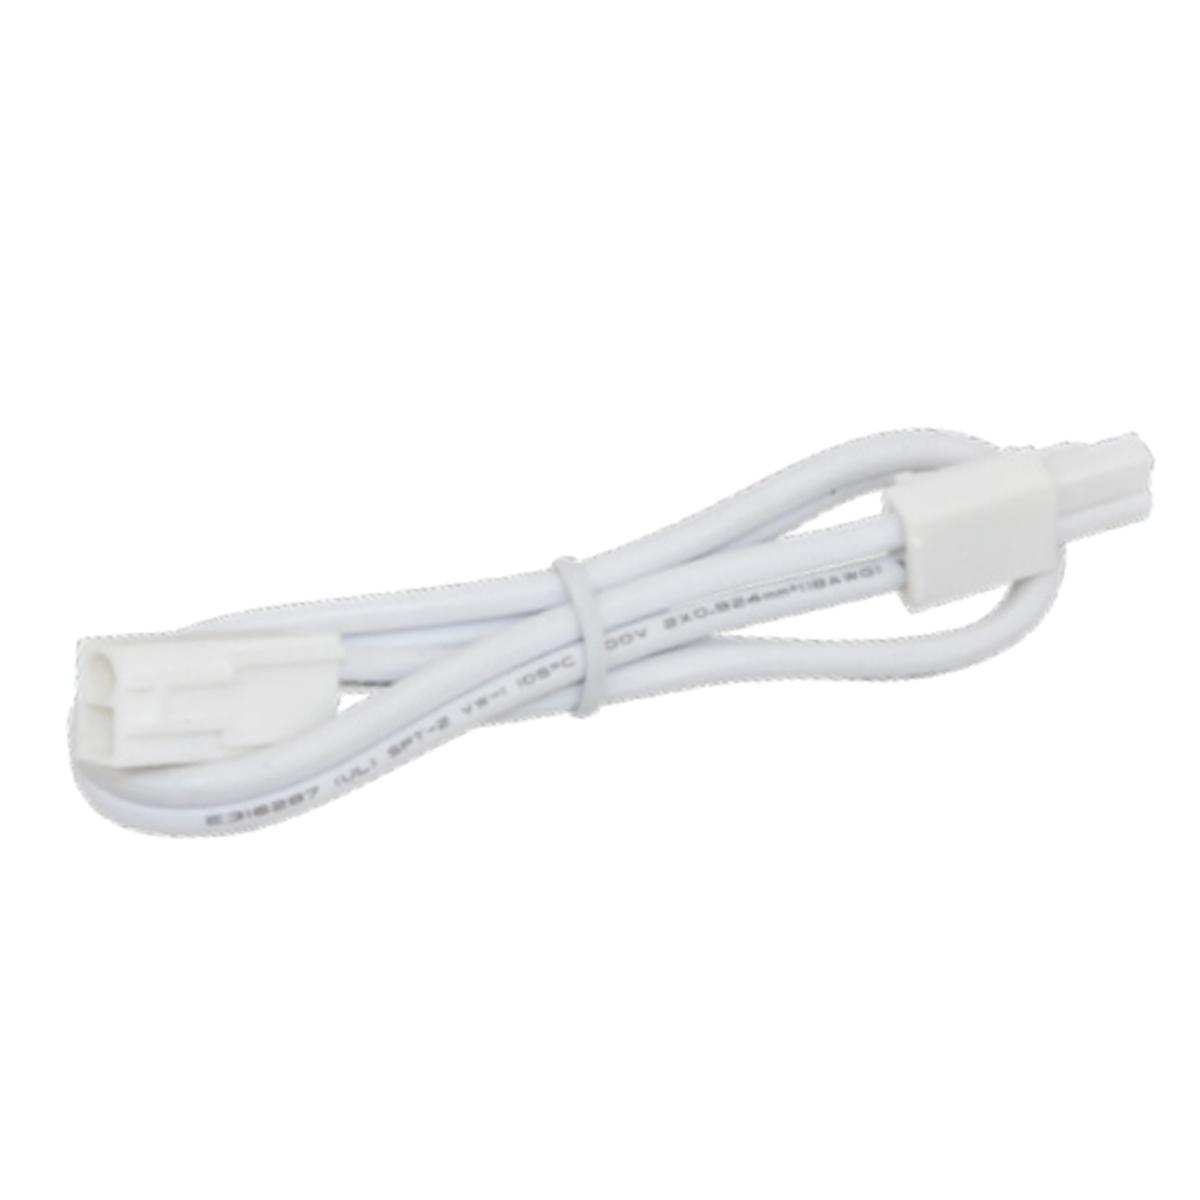 MVP 12in. Linking Cable, White